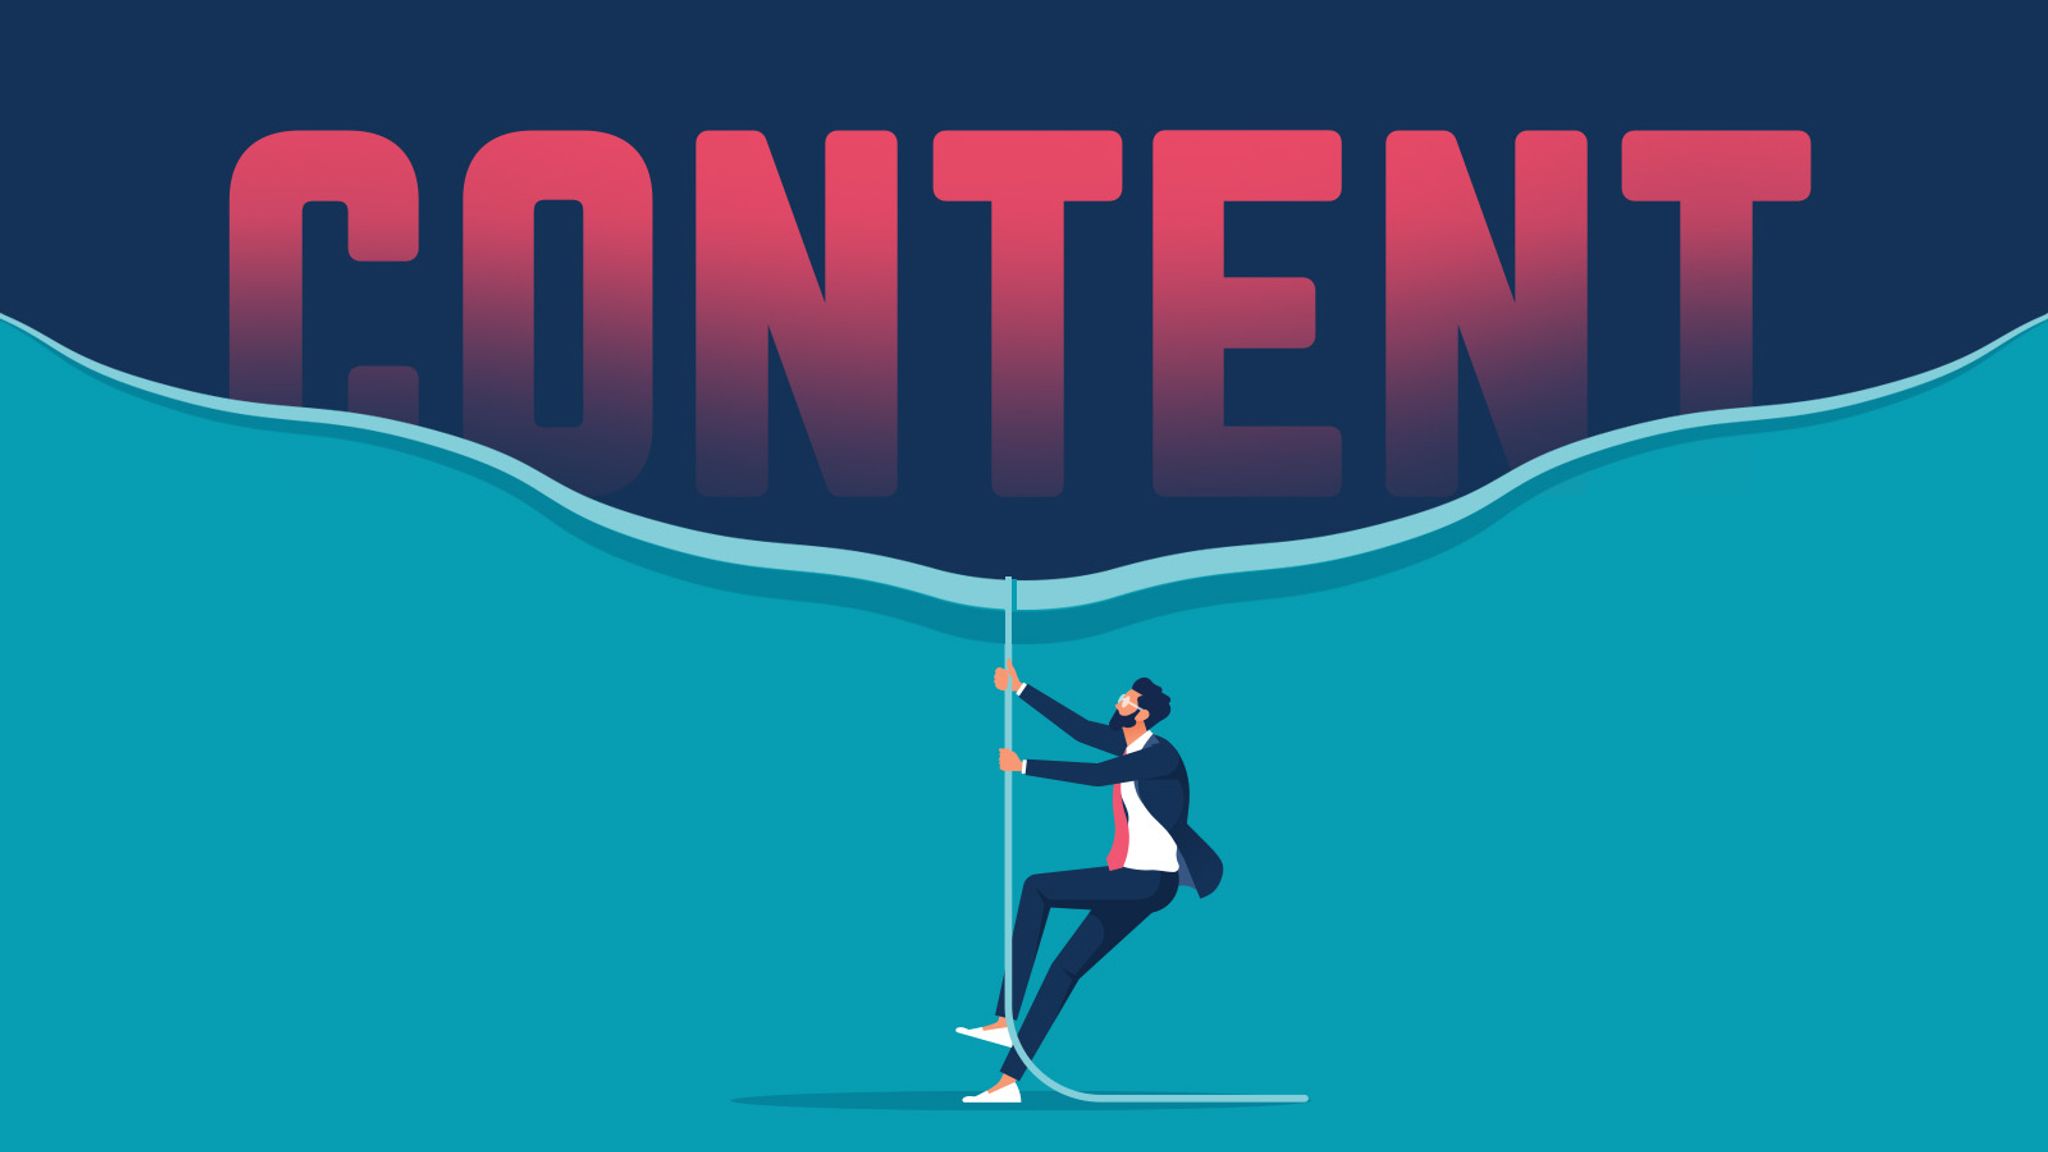 Featured image of graphic man pulling down a curtain to reveal a large text graphic of the word "CONTENT"